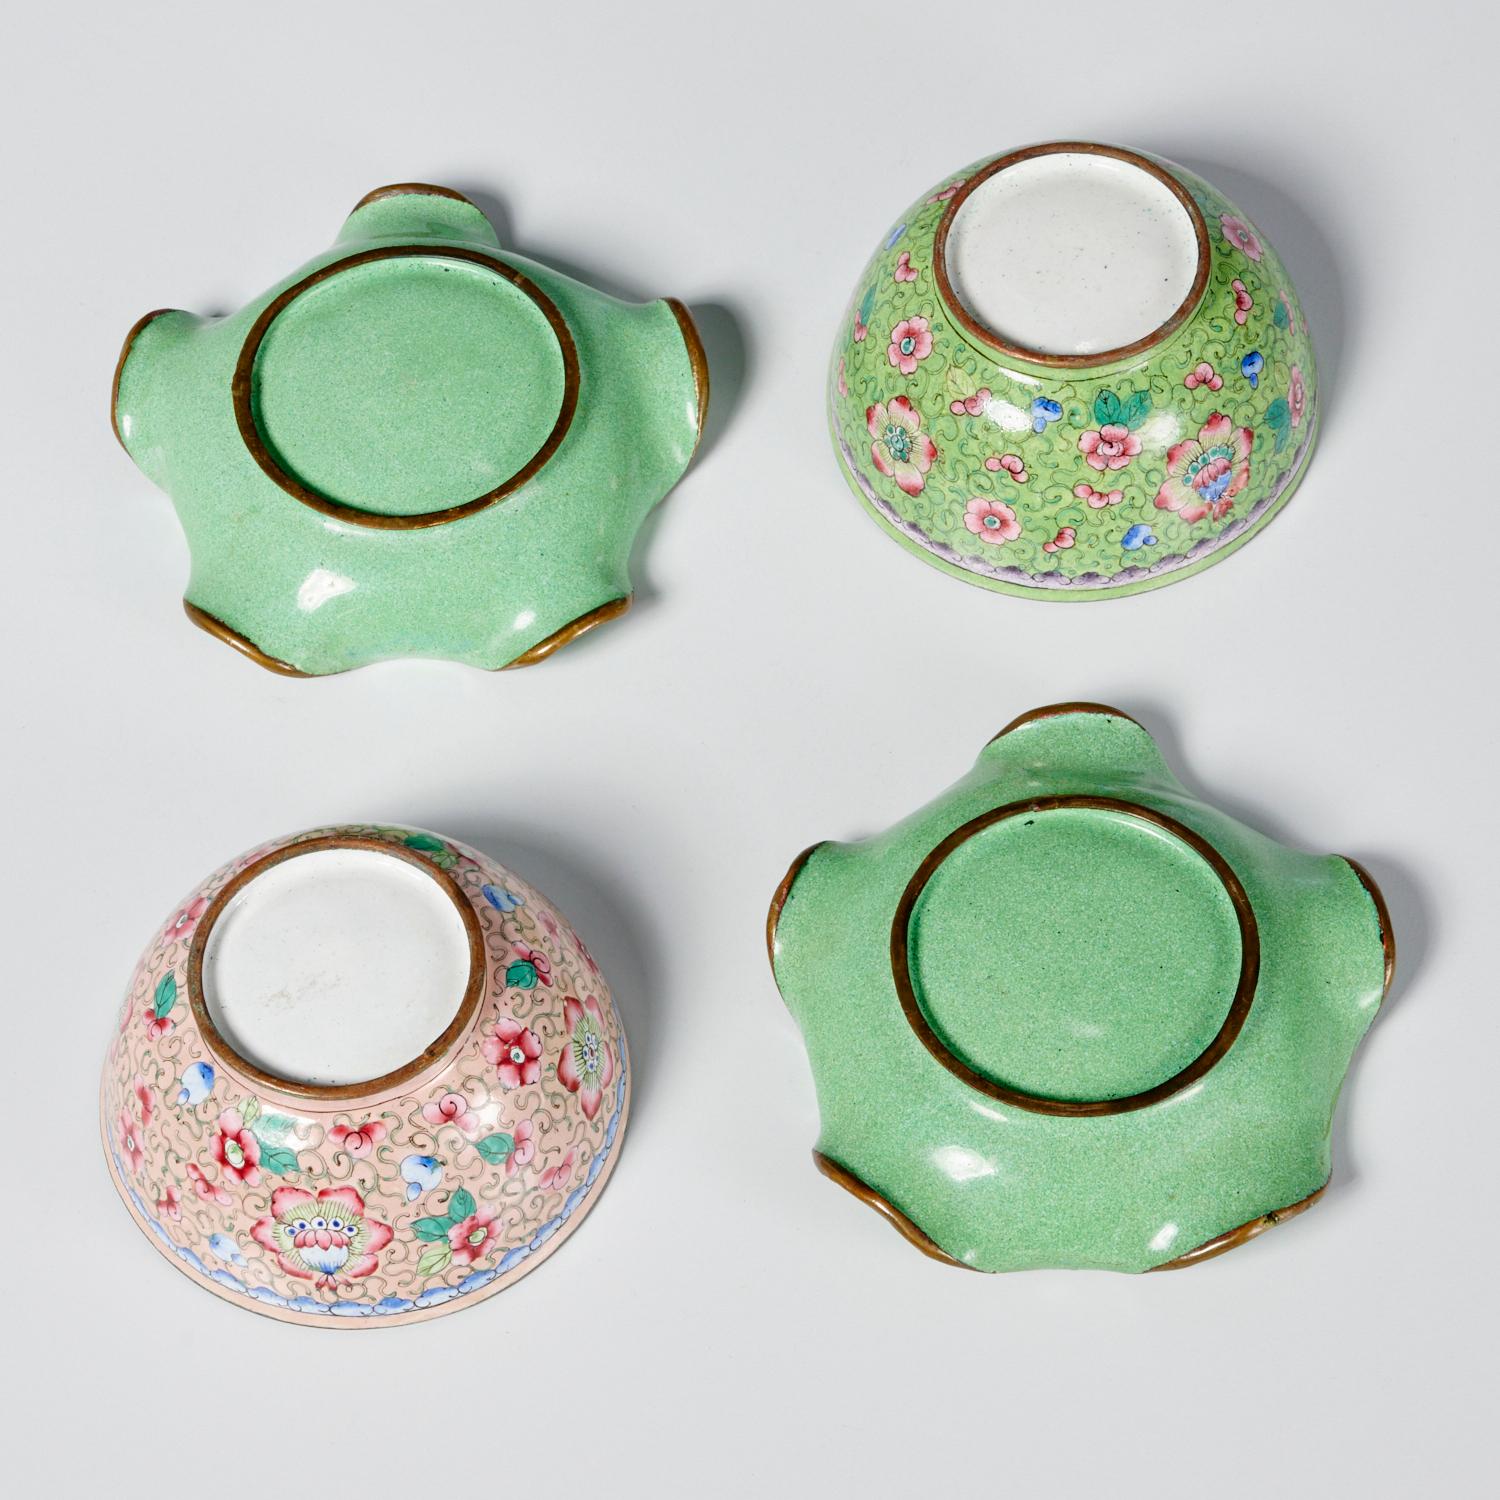 19th/20th c., Chinese enamelware, includes (2) cups and (2) small scalloped edge dishes, each with enameled floral design on a copper ground, unmarked.

This type of enamelling is known by several names, including Beijing, Canton and Peking enamel